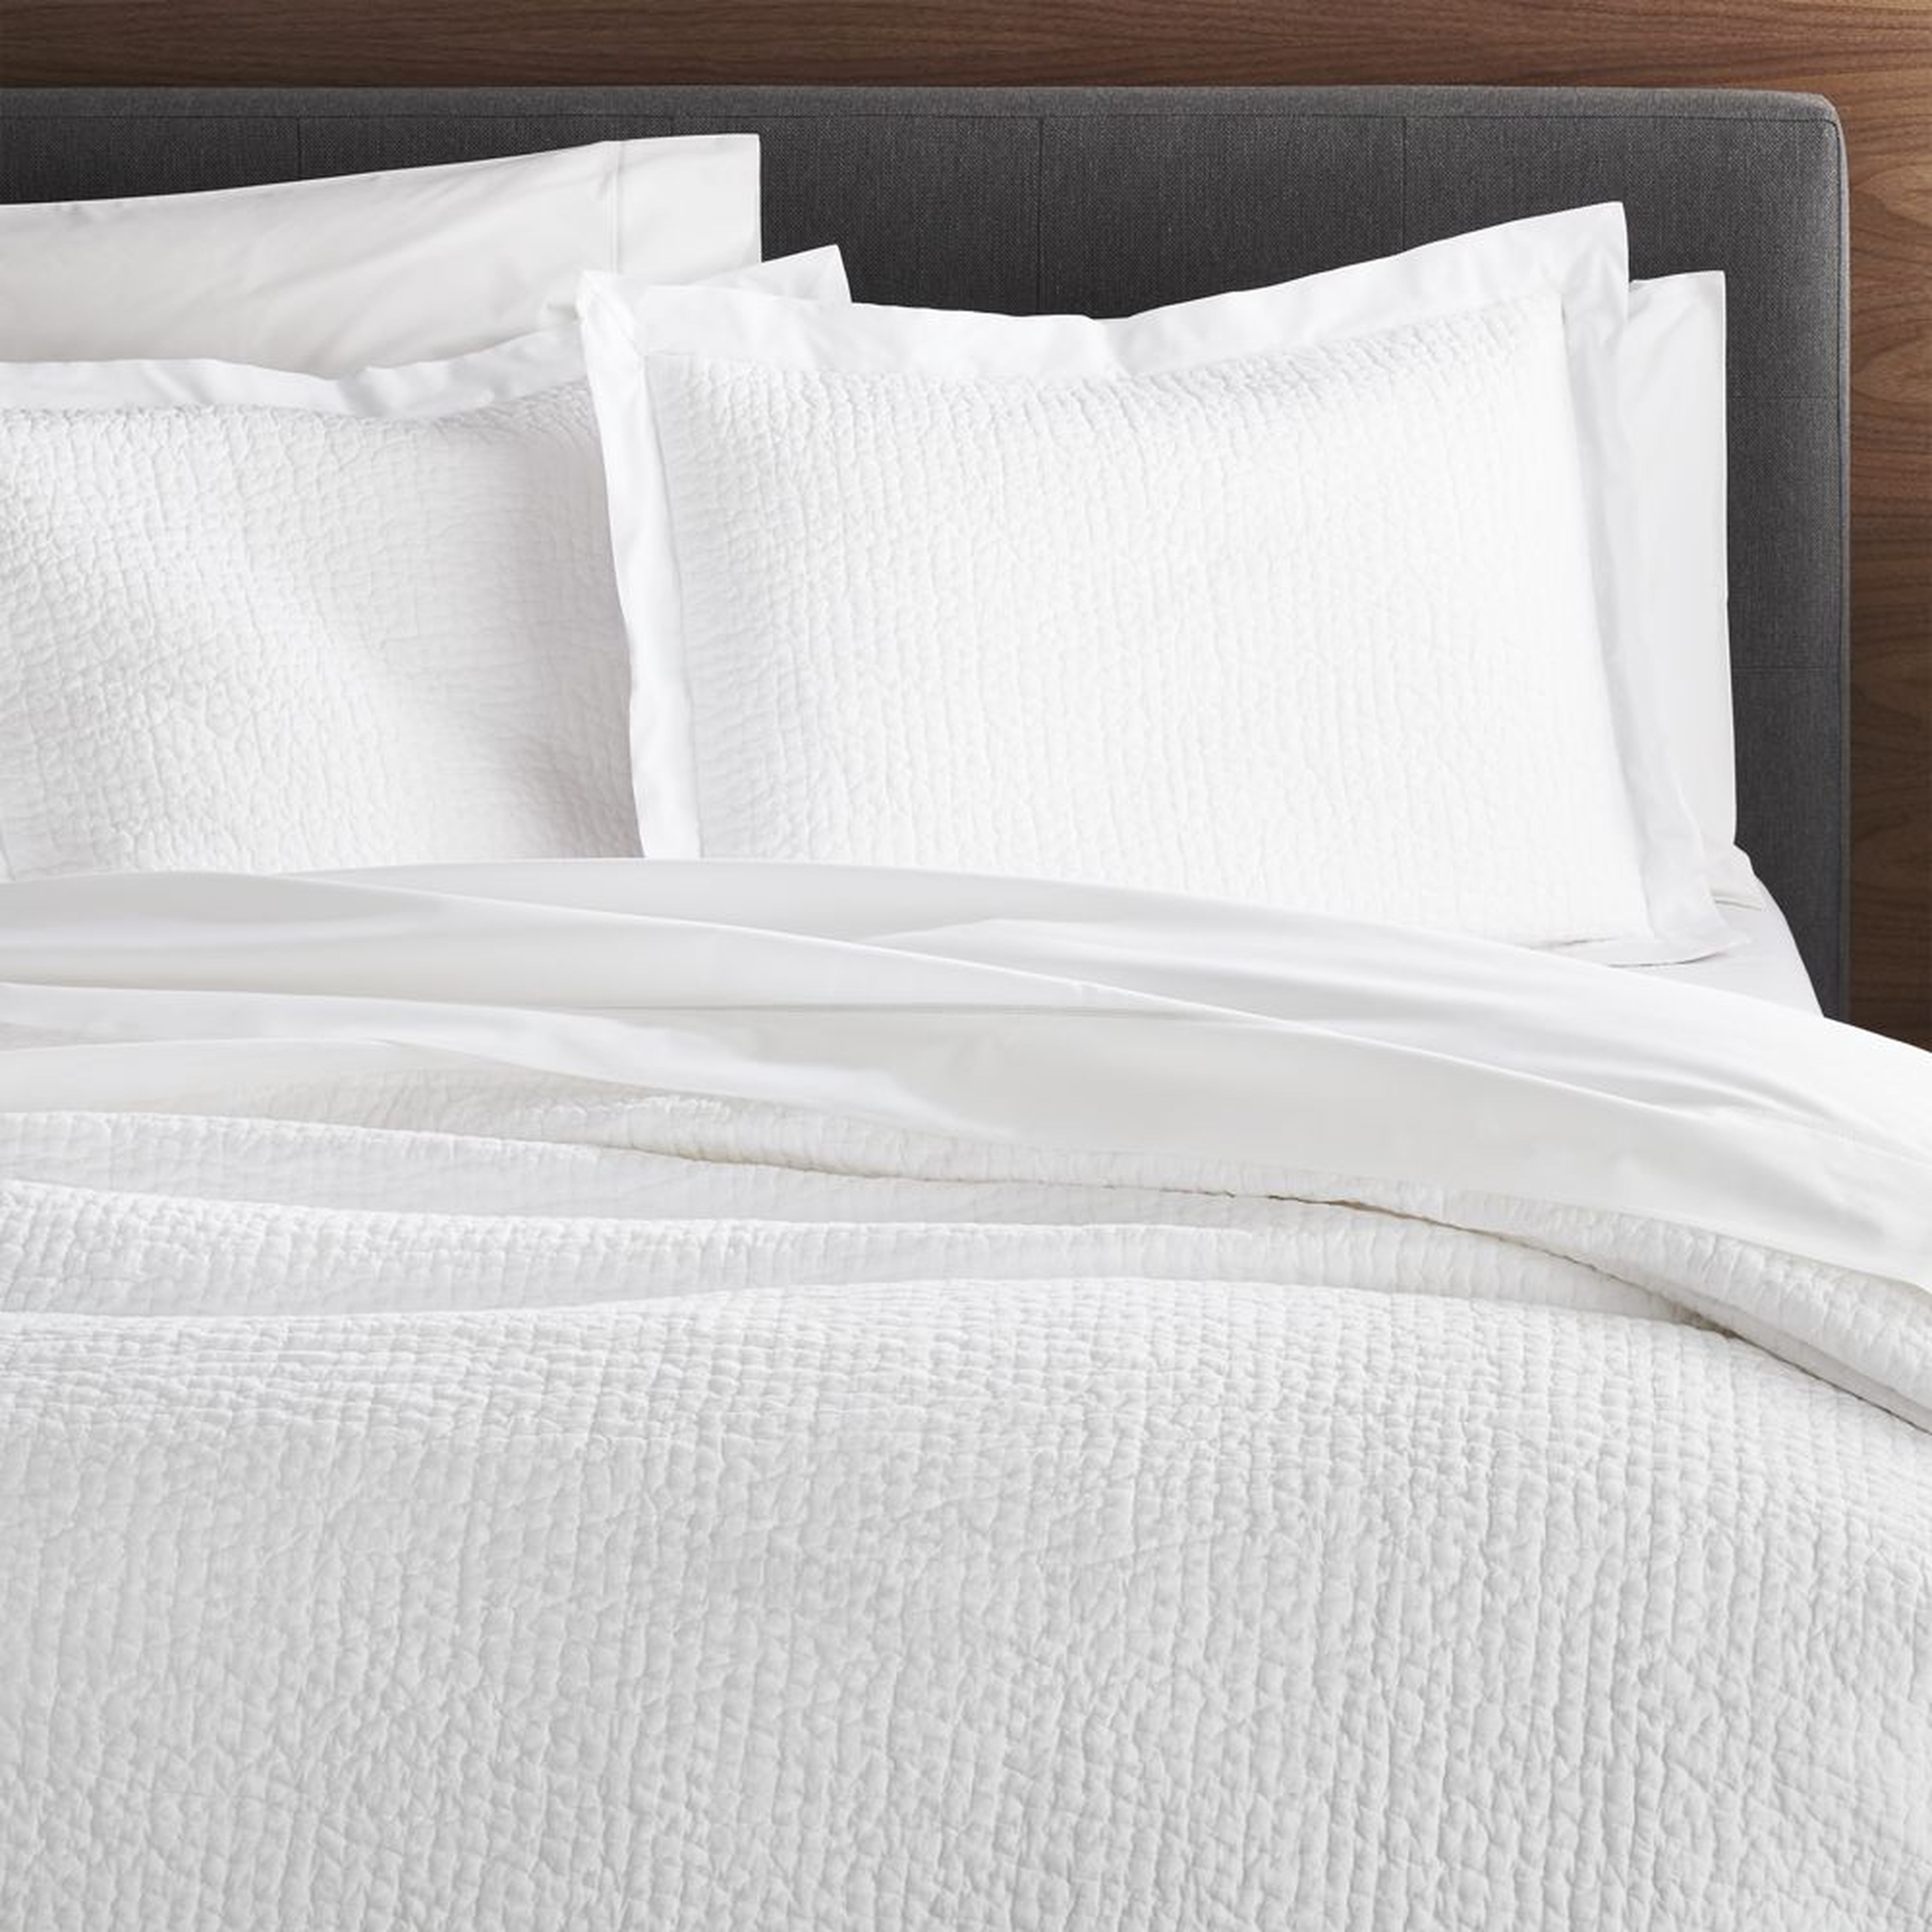 Celeste White Cotton Solid Quilt King - Crate and Barrel